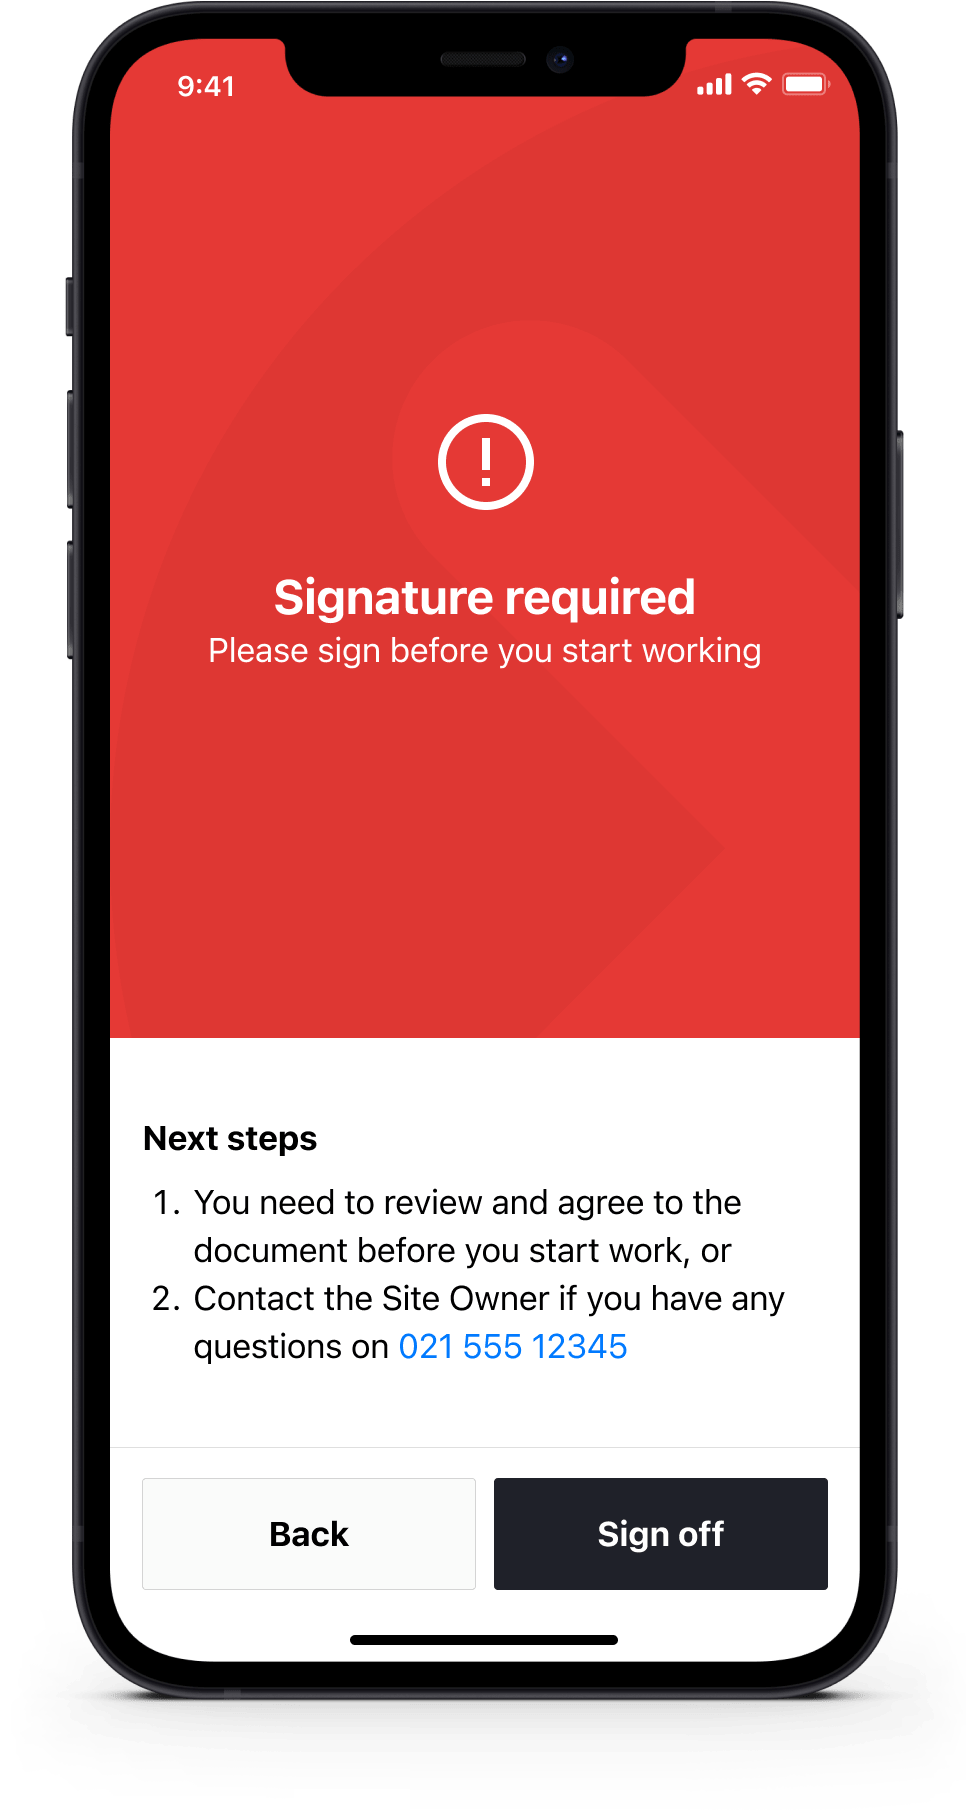 worksite-health-and-safety-app-feedback-warning